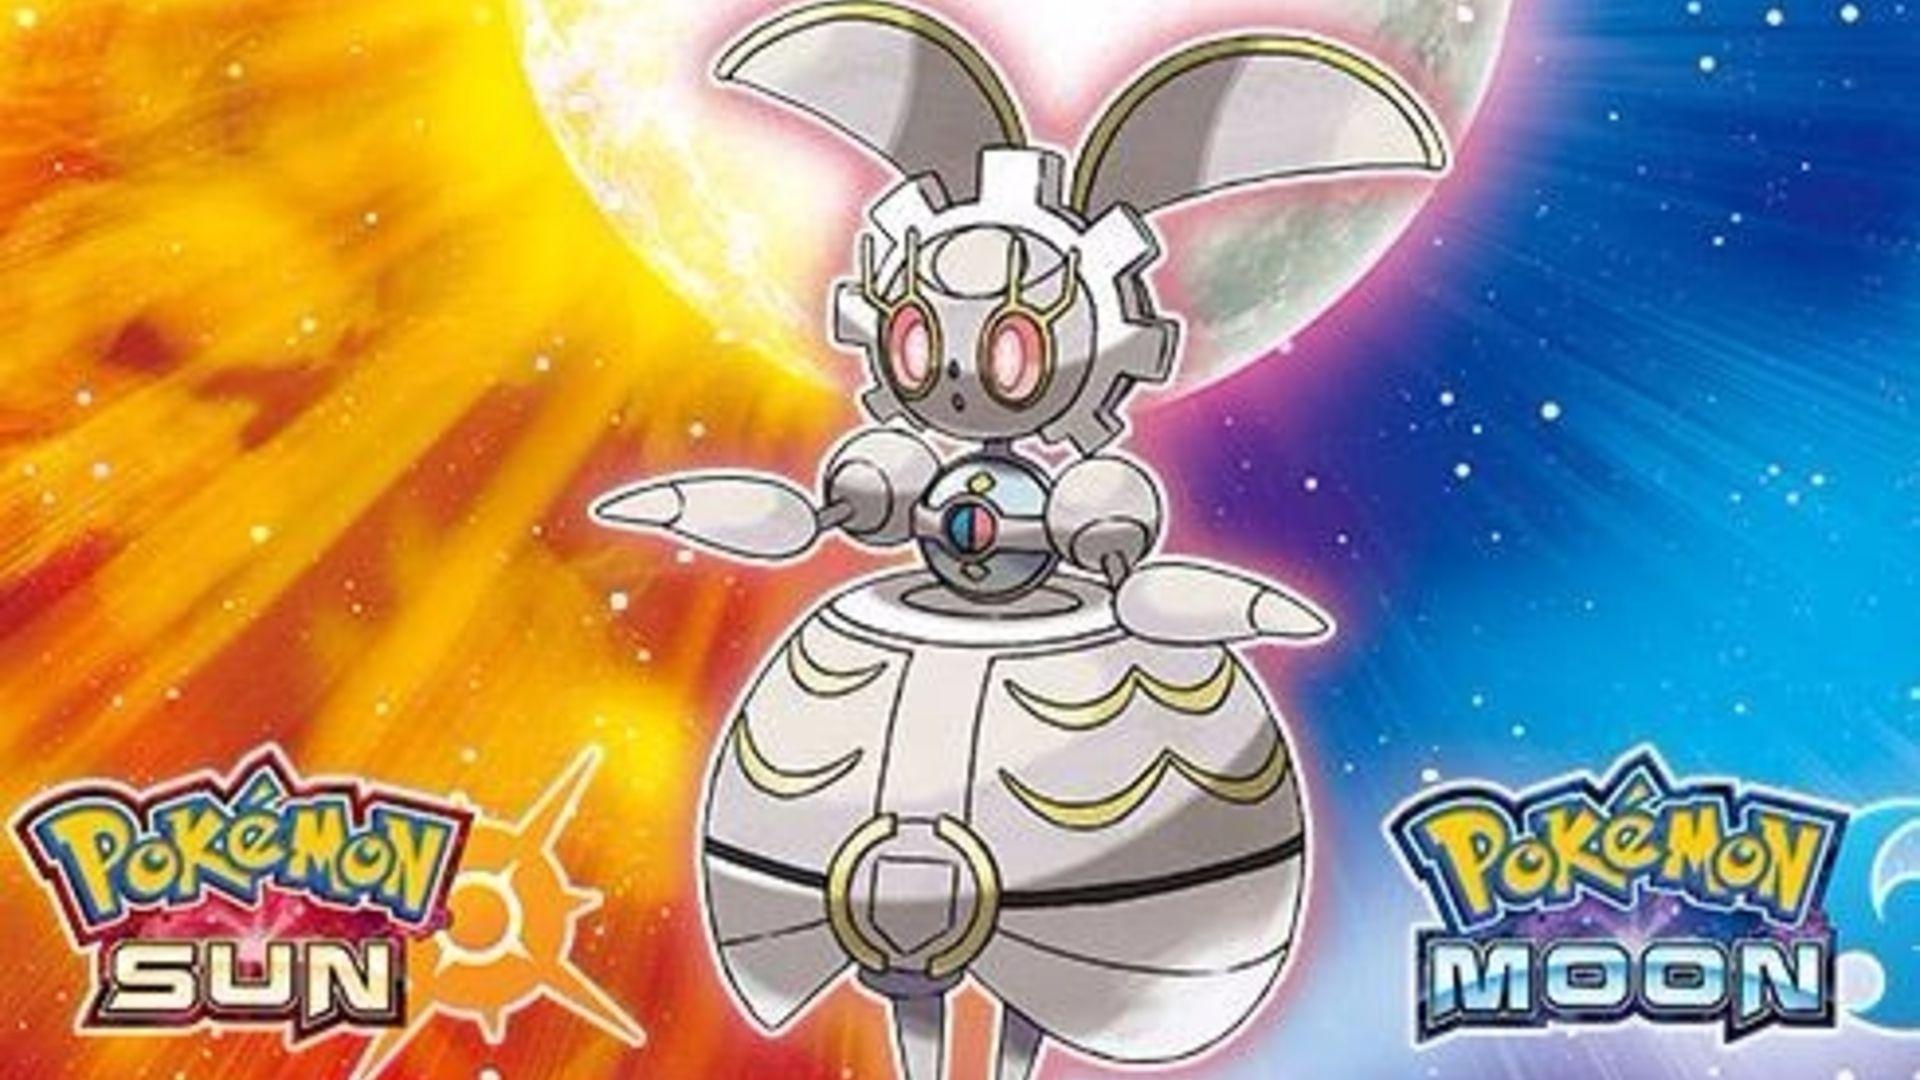 Pokémon Sun and Moon Magearna QR Code details and how to